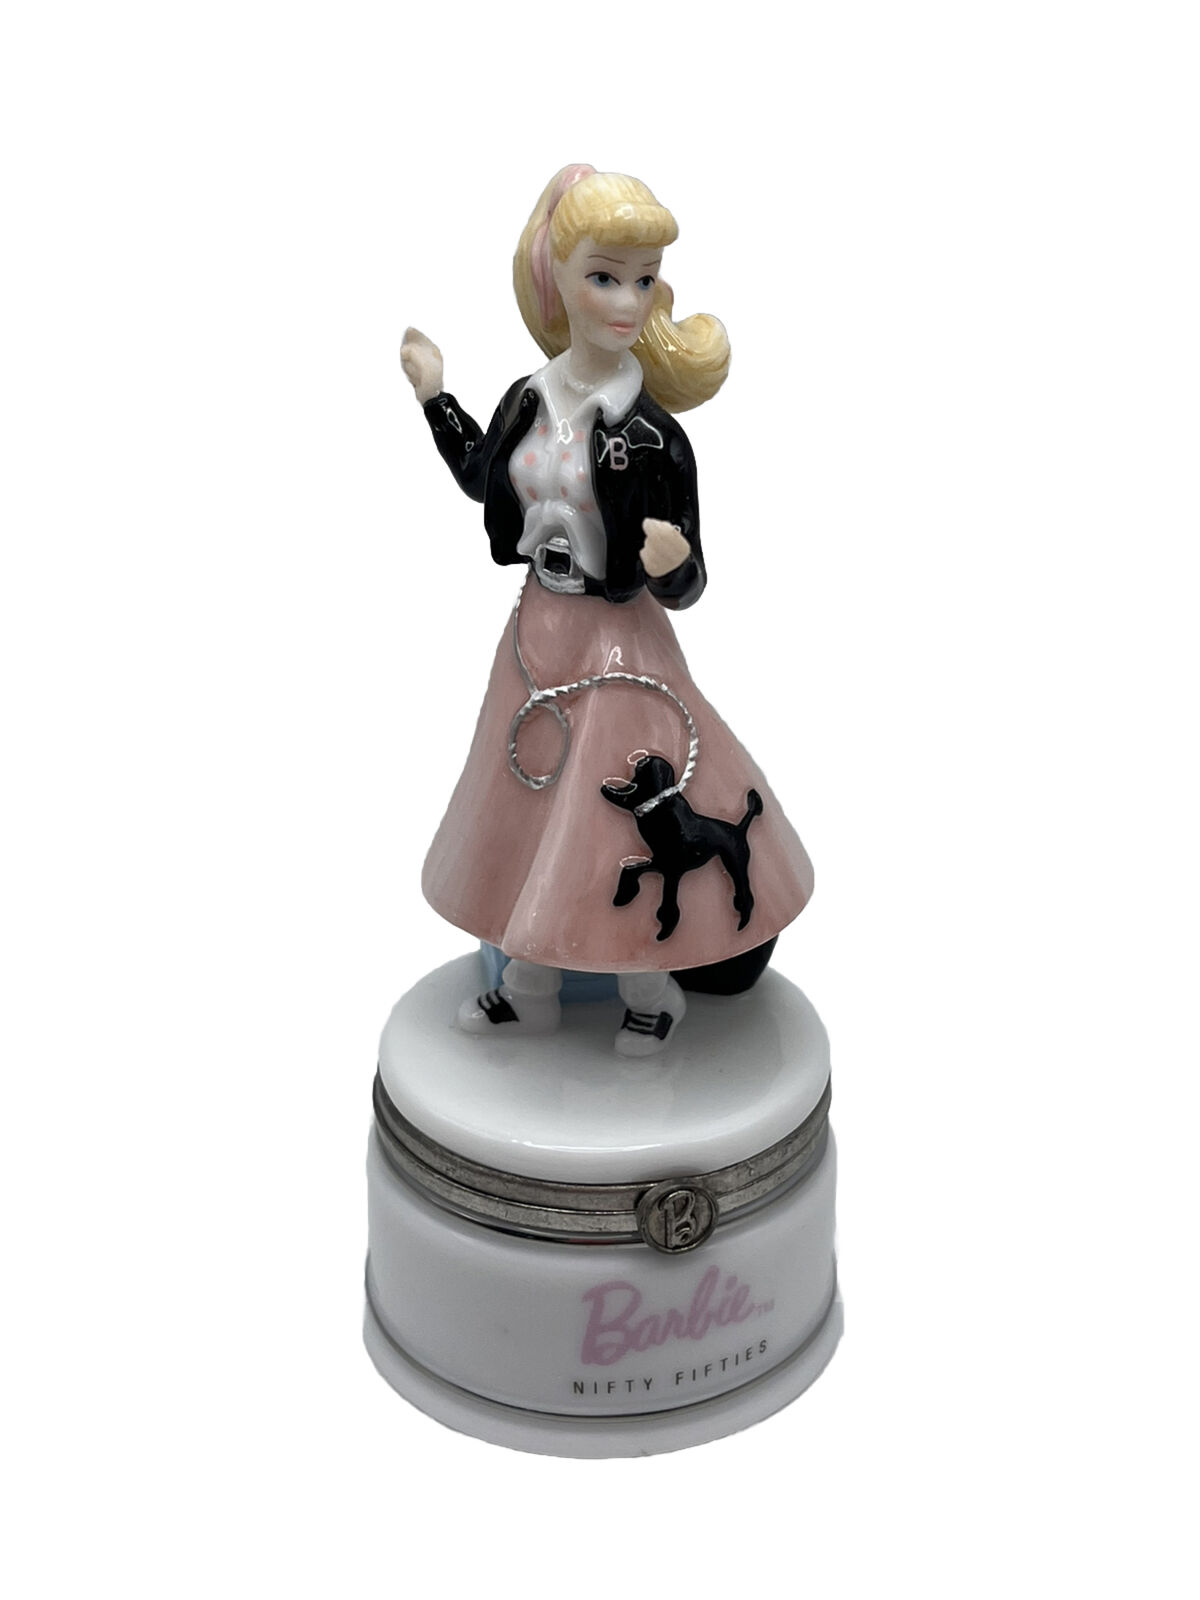 PHB Barbie Contemporary Series Nifty Fifties Porcelain Hinged Box Midwest Cannon